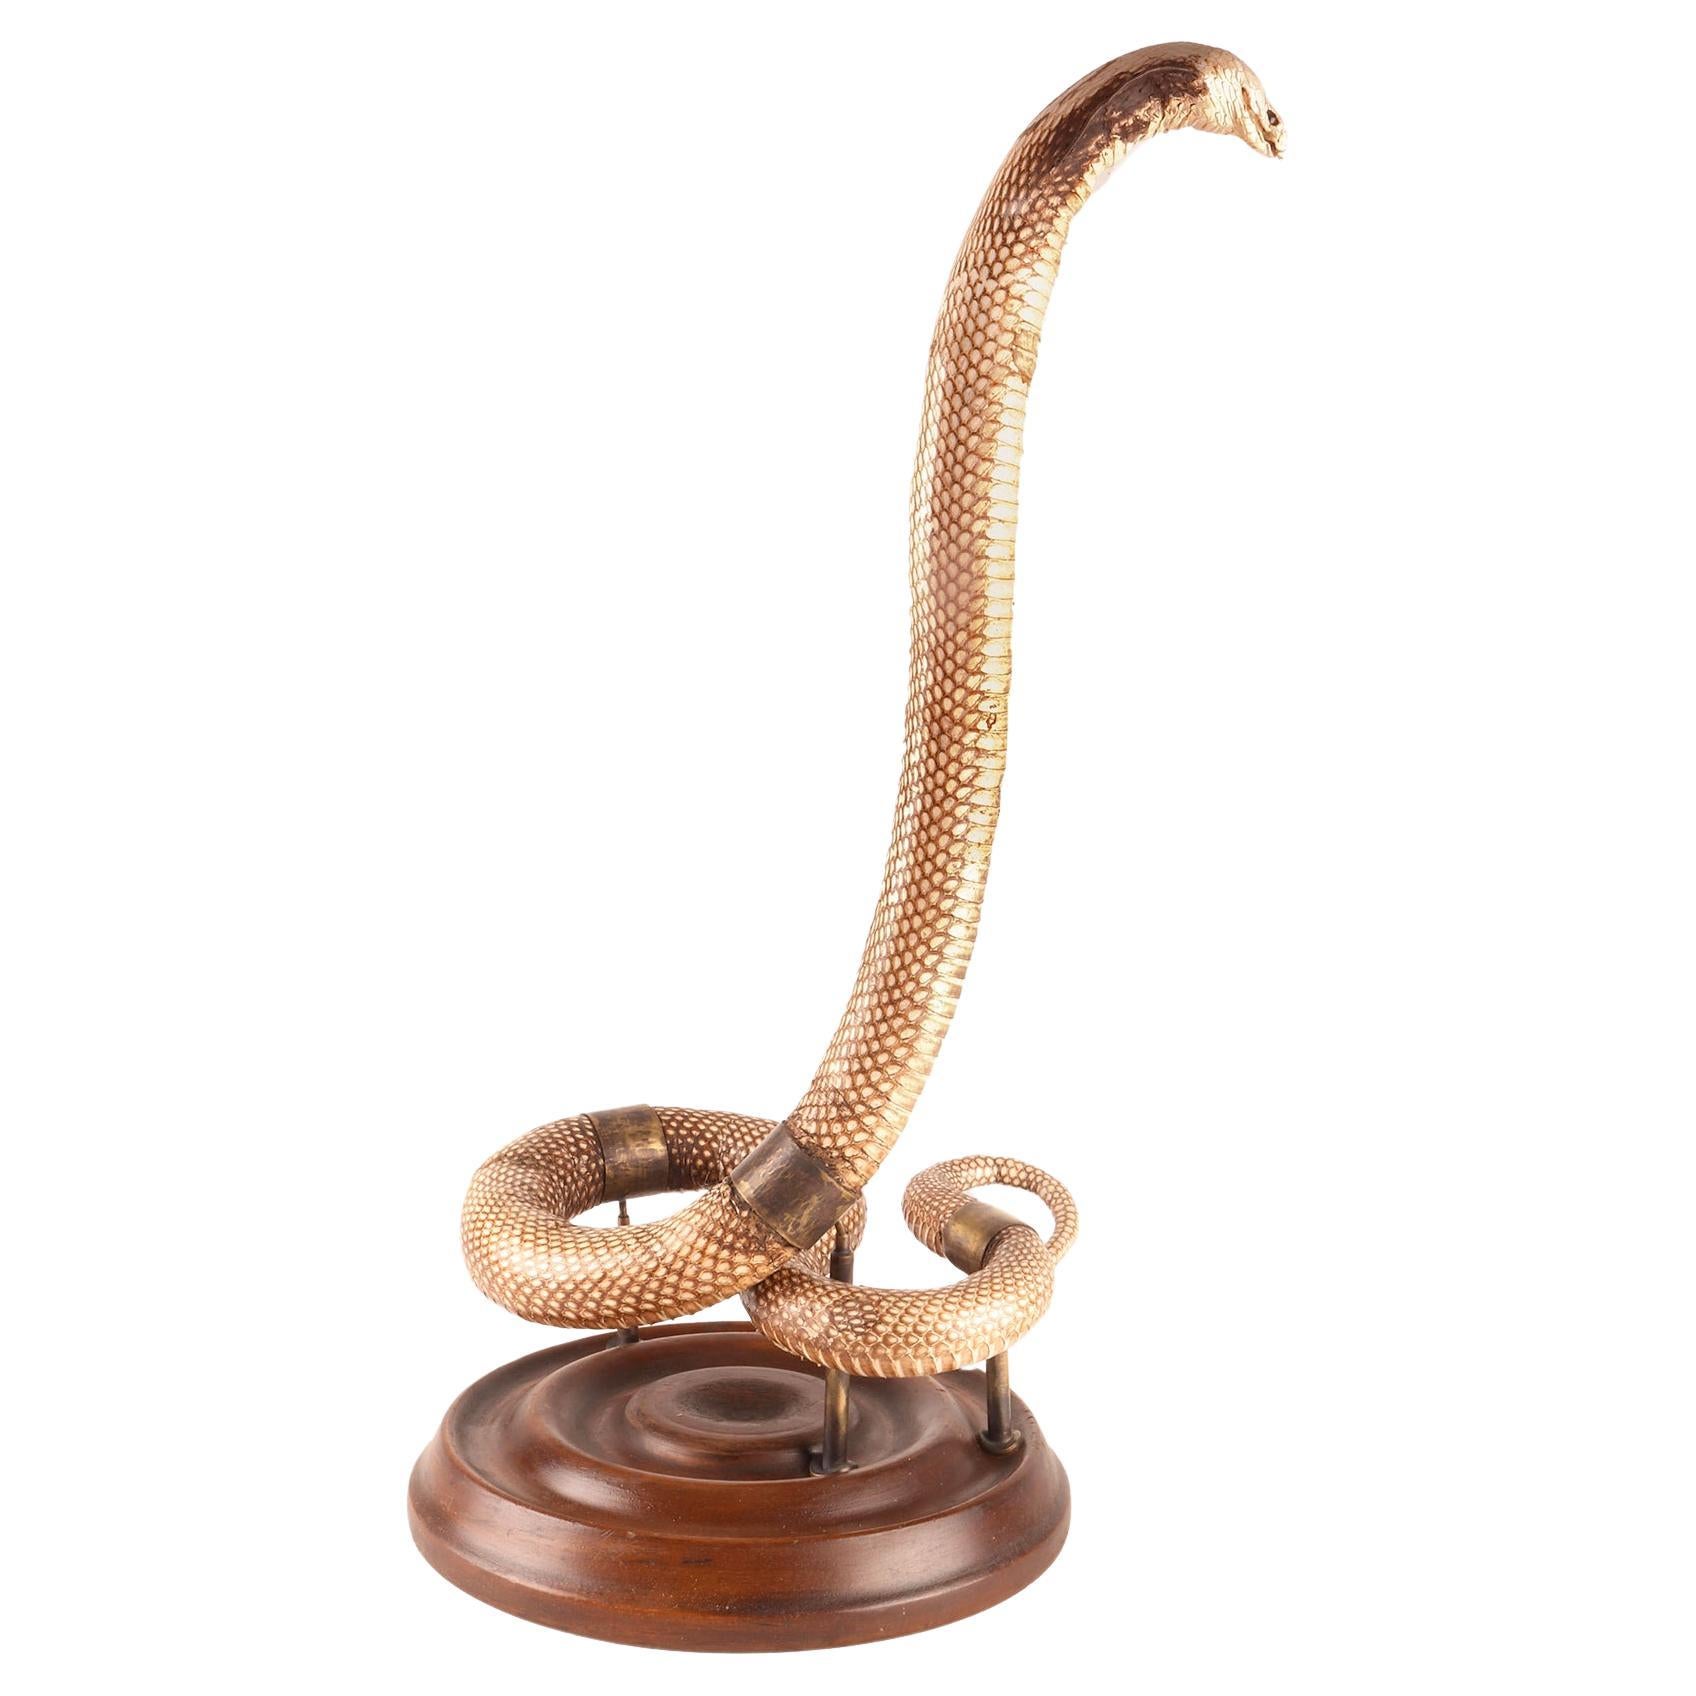 A specimen of Hemachatus hemachatus snake taxidermy, Italy 1890. For Sale